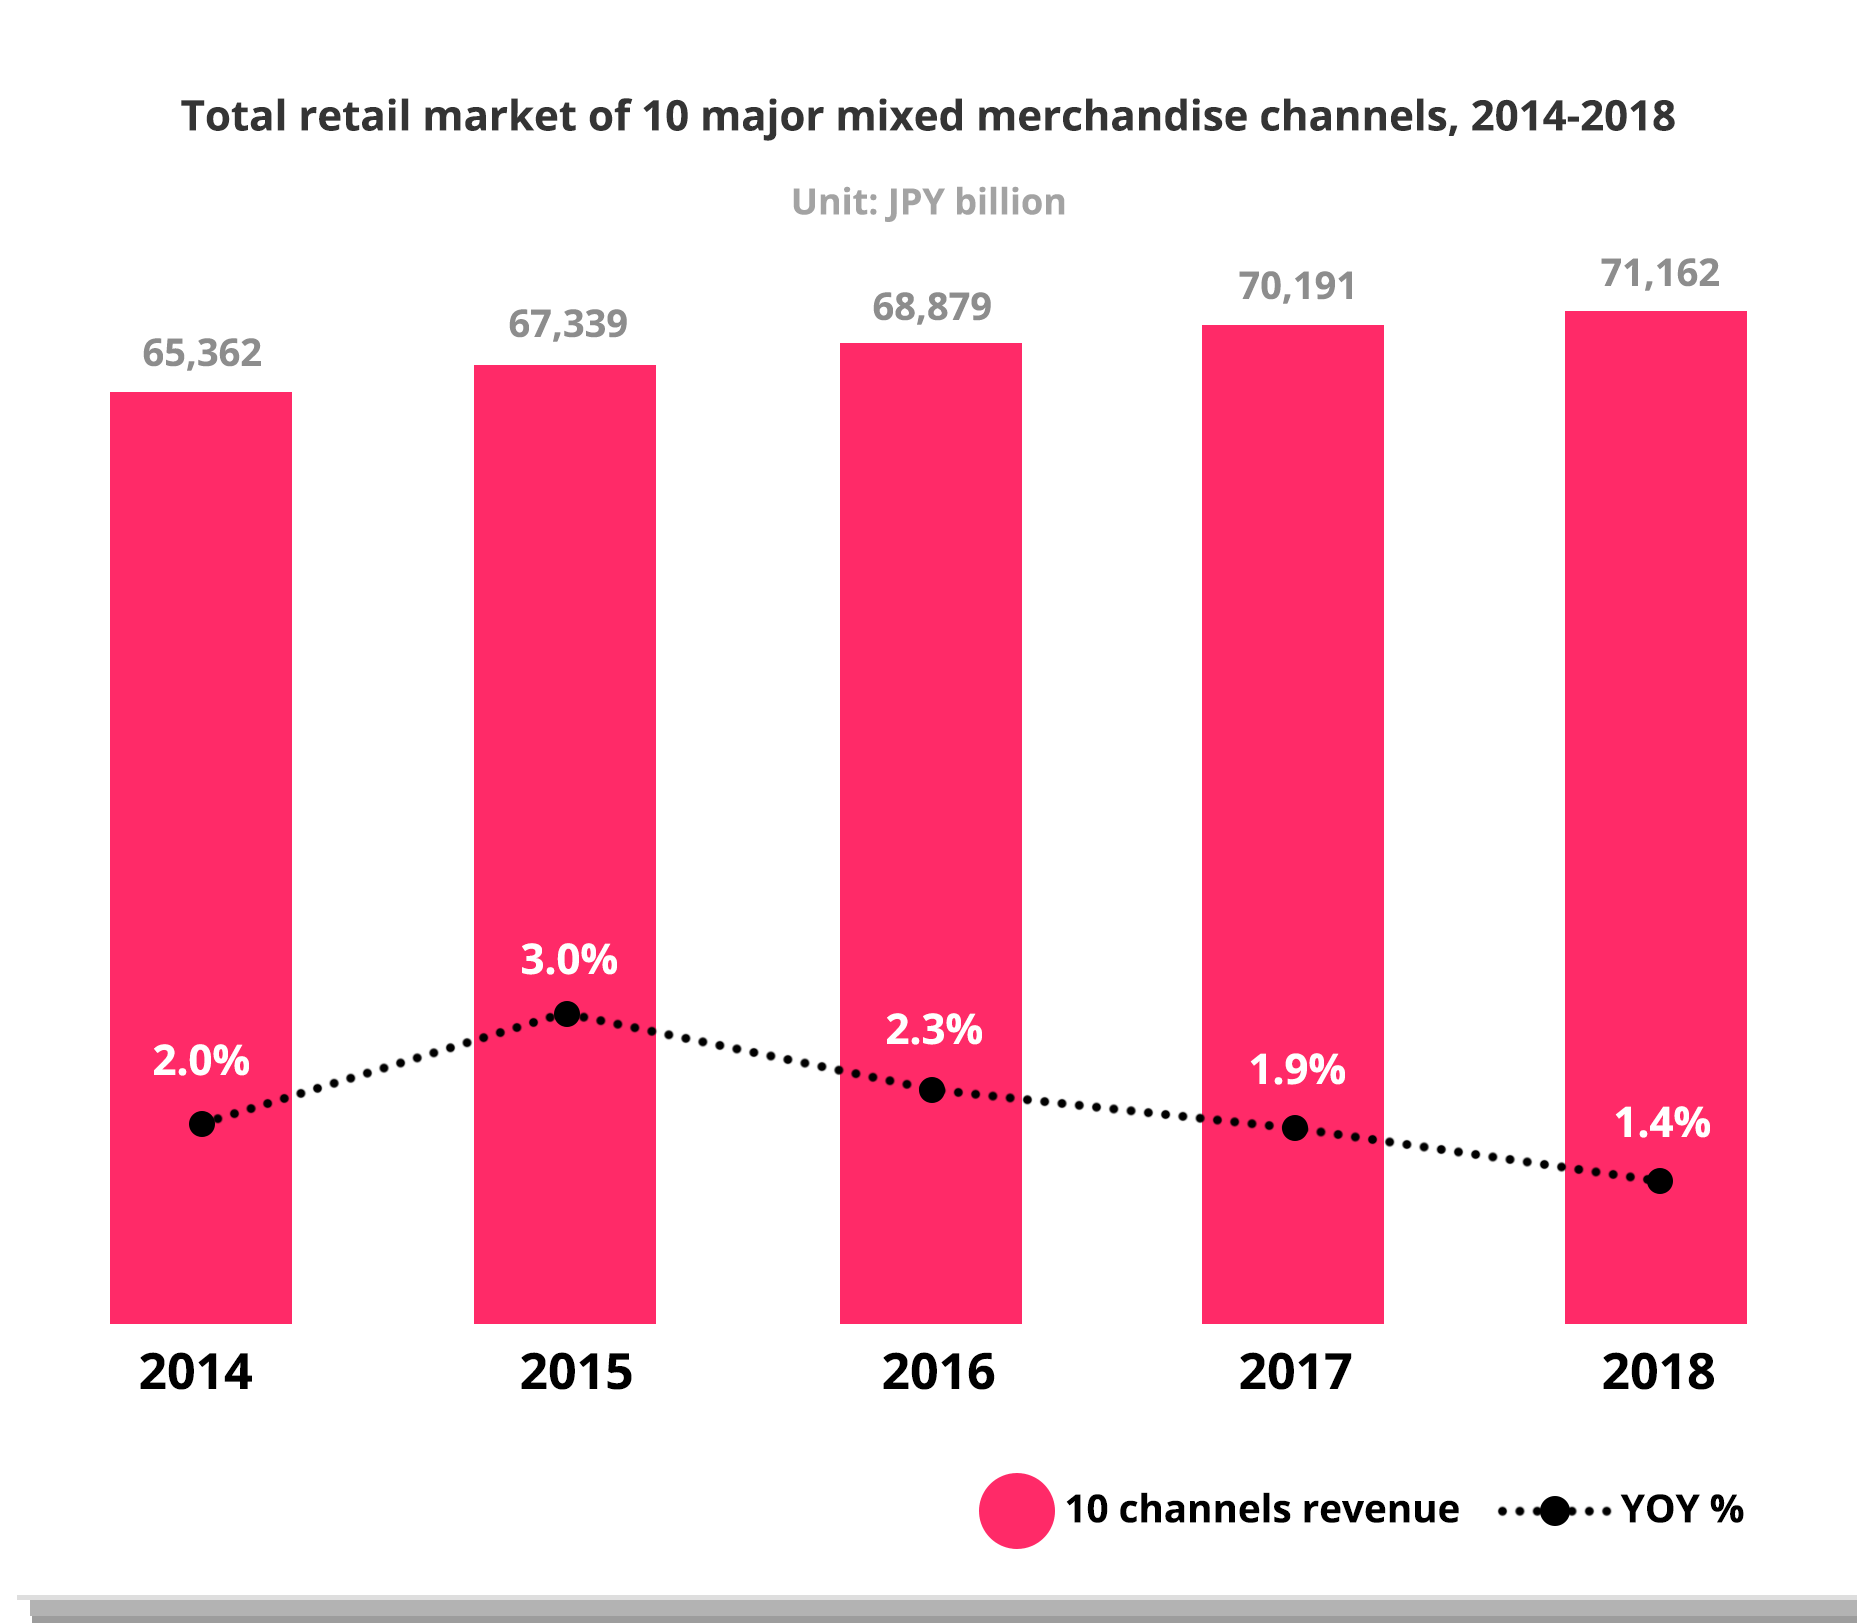 The market size of 10 mixed merchandise channels grew by 8.9 percent in the past 5 years.